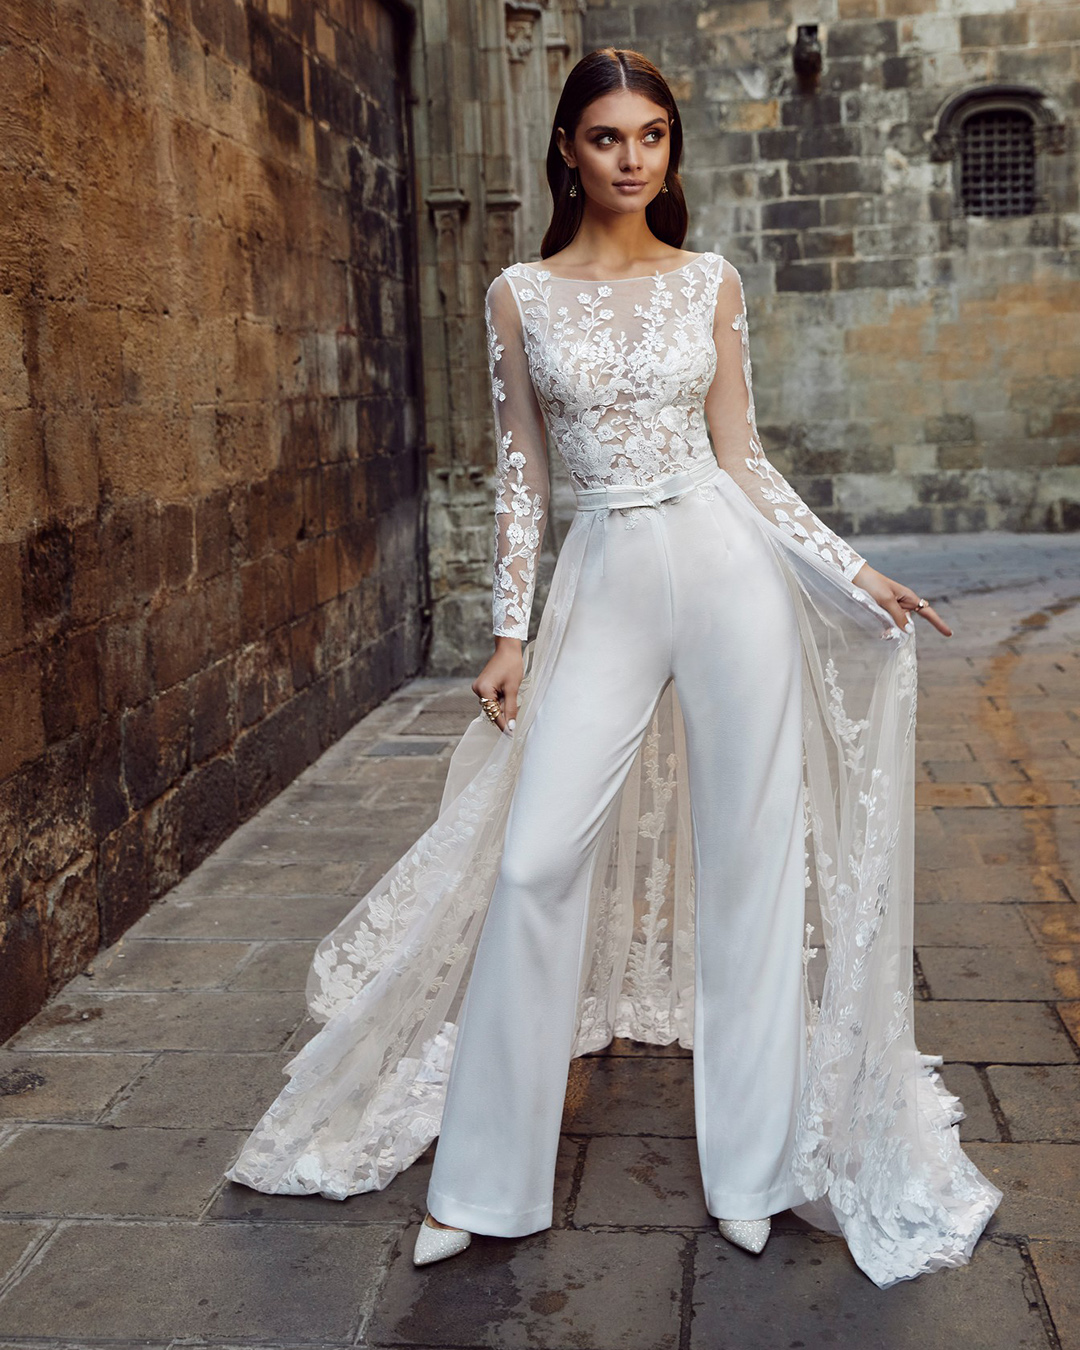 wedding pantsuits lace top with sleeves overskirt ronaldjoyce